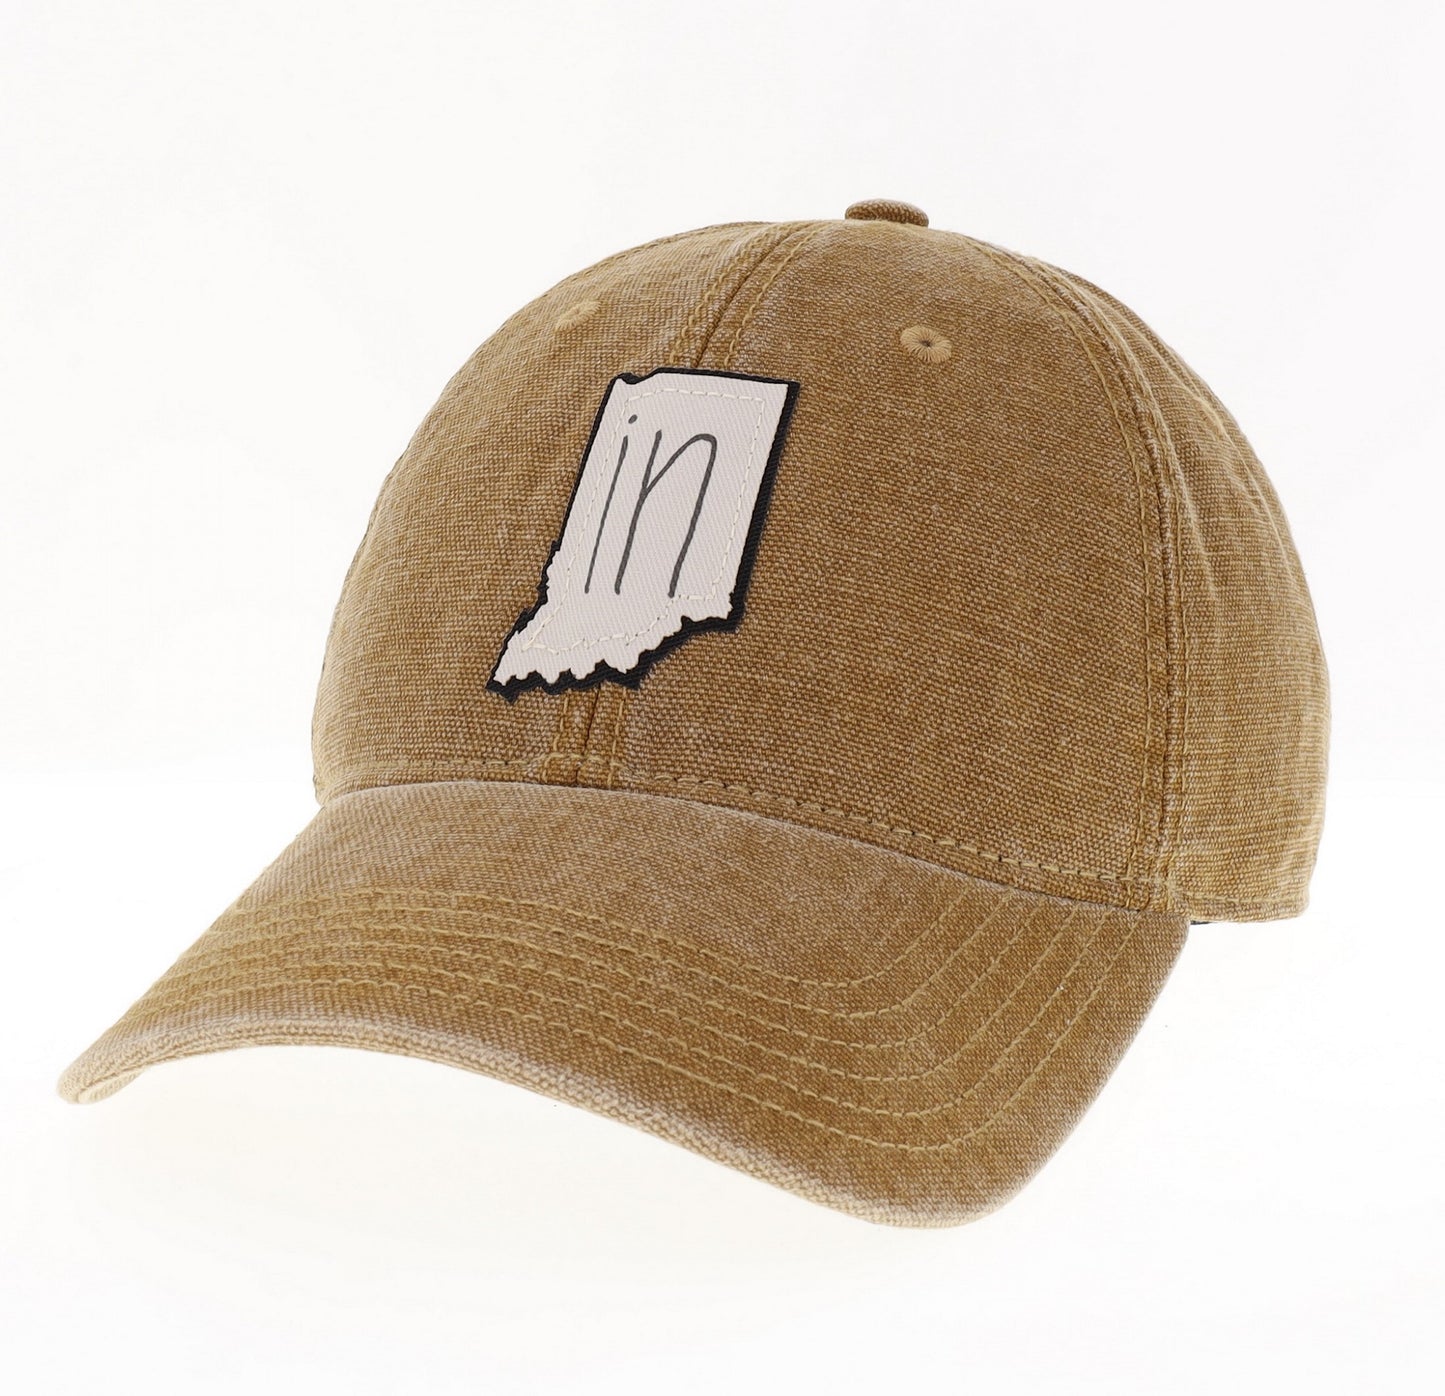 Indiana Dashboard Hat in Camel